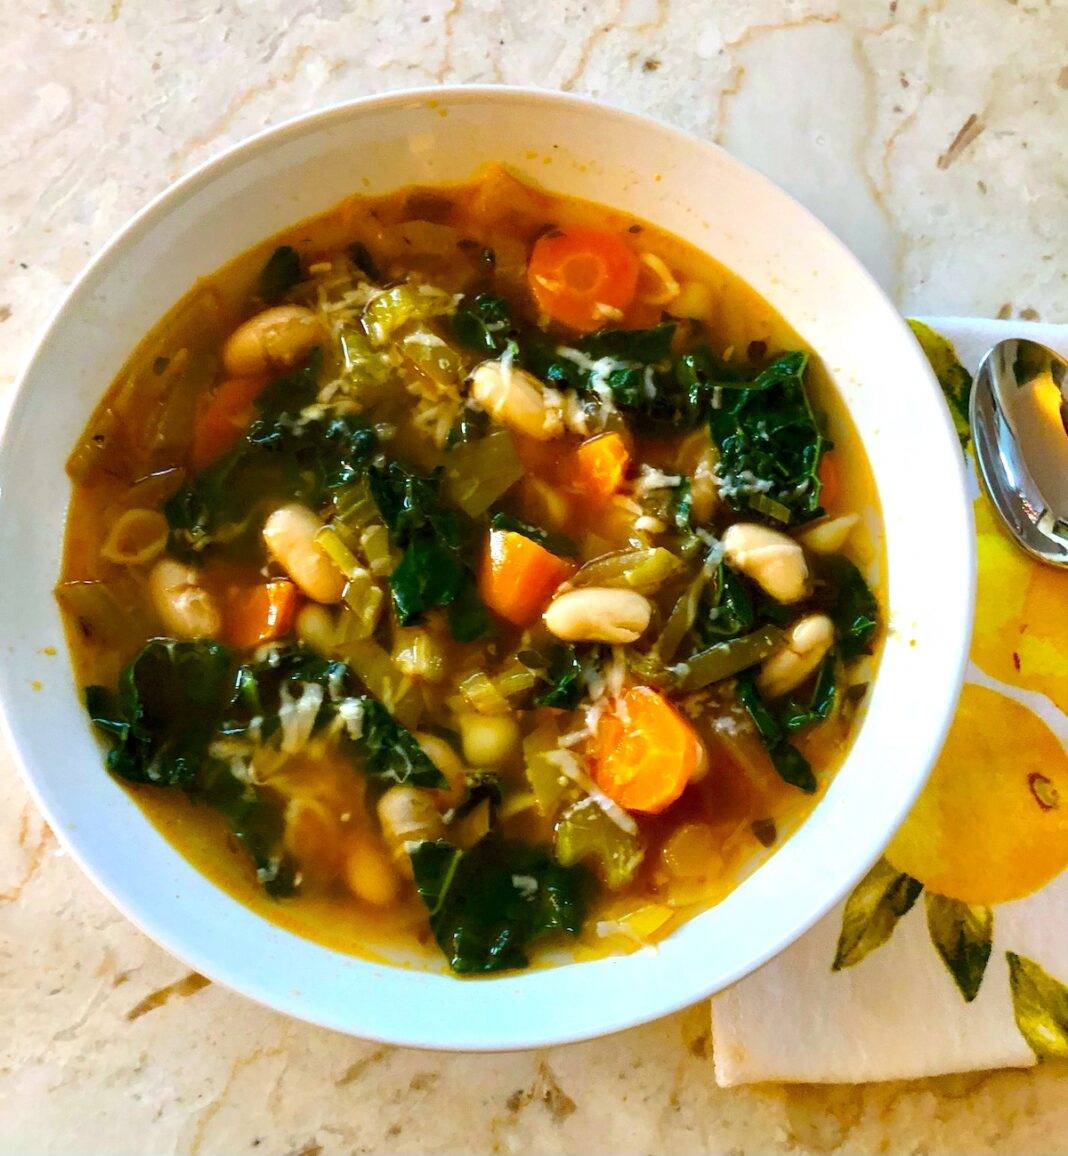 Bowl of soup with kale, carrots and white beans